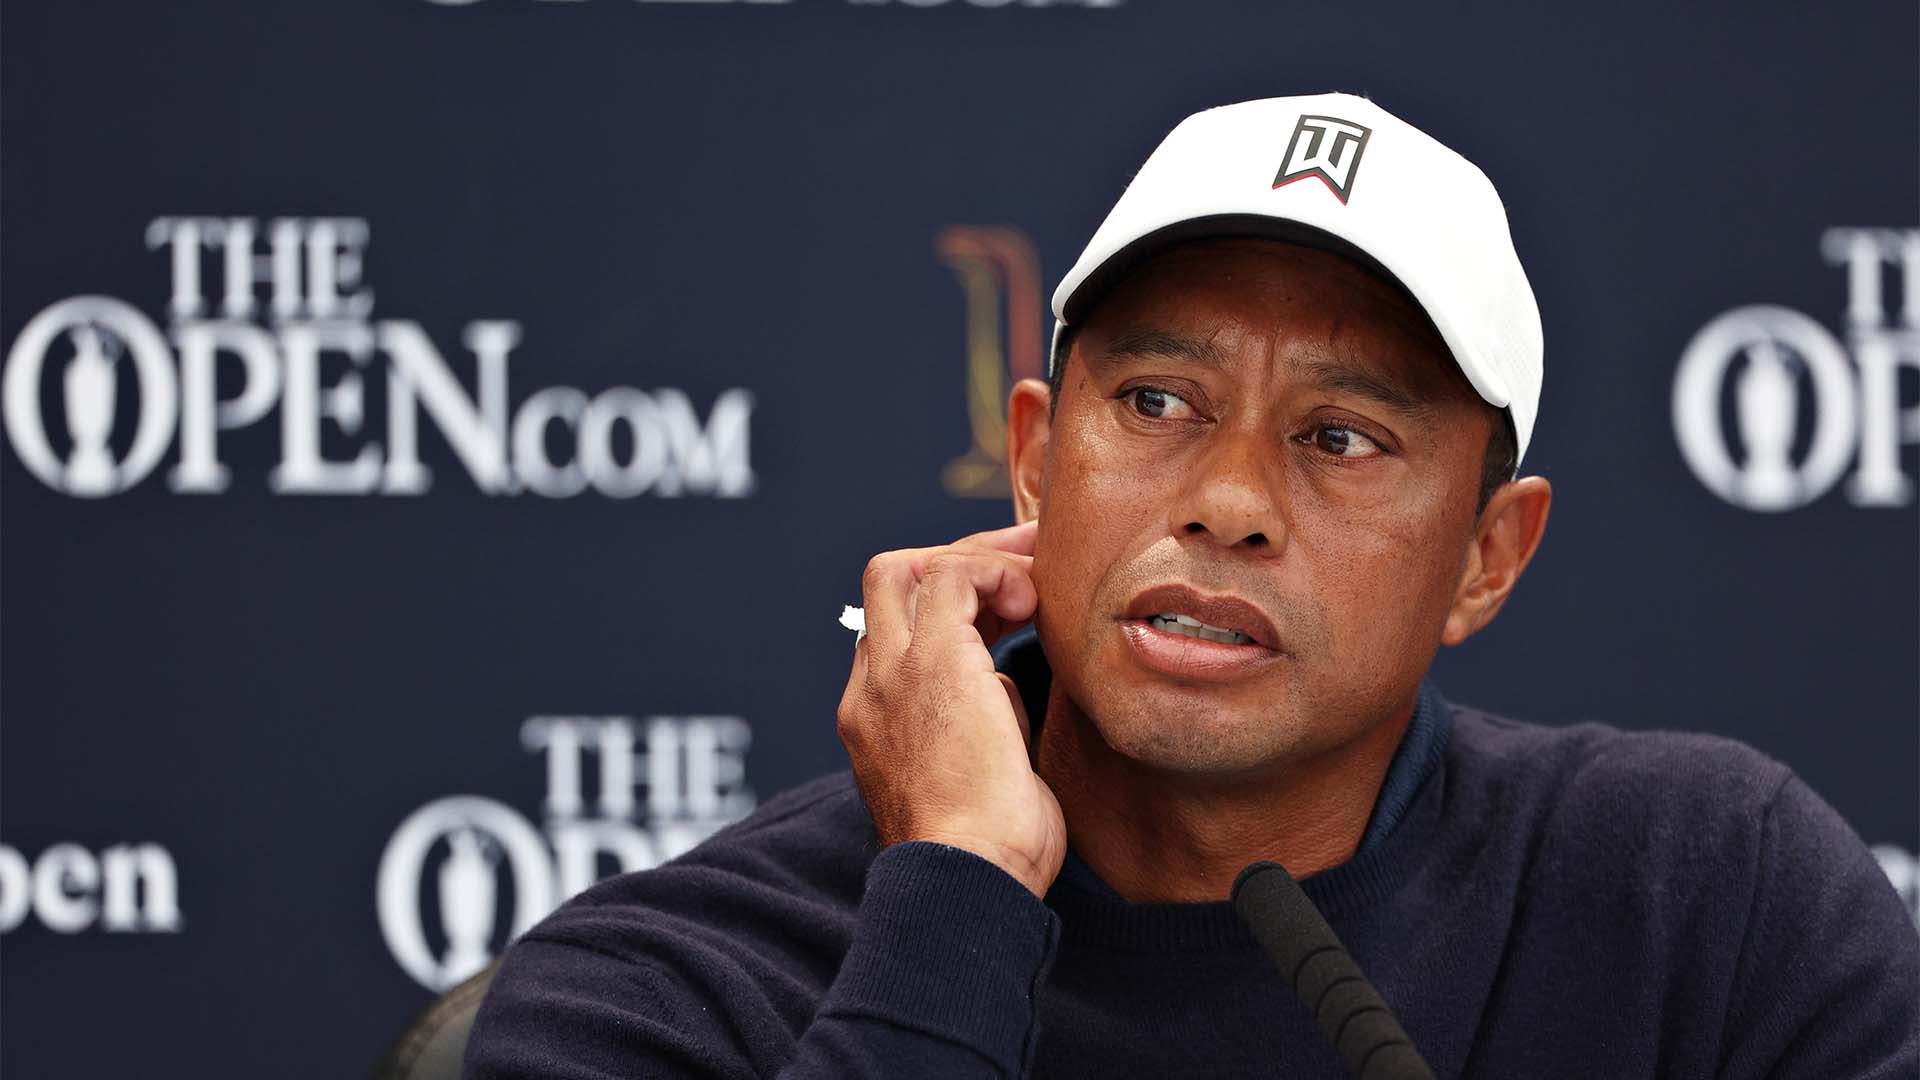 Tiger Woods during an interview at the 150th Open in St Andrews, Scotland.